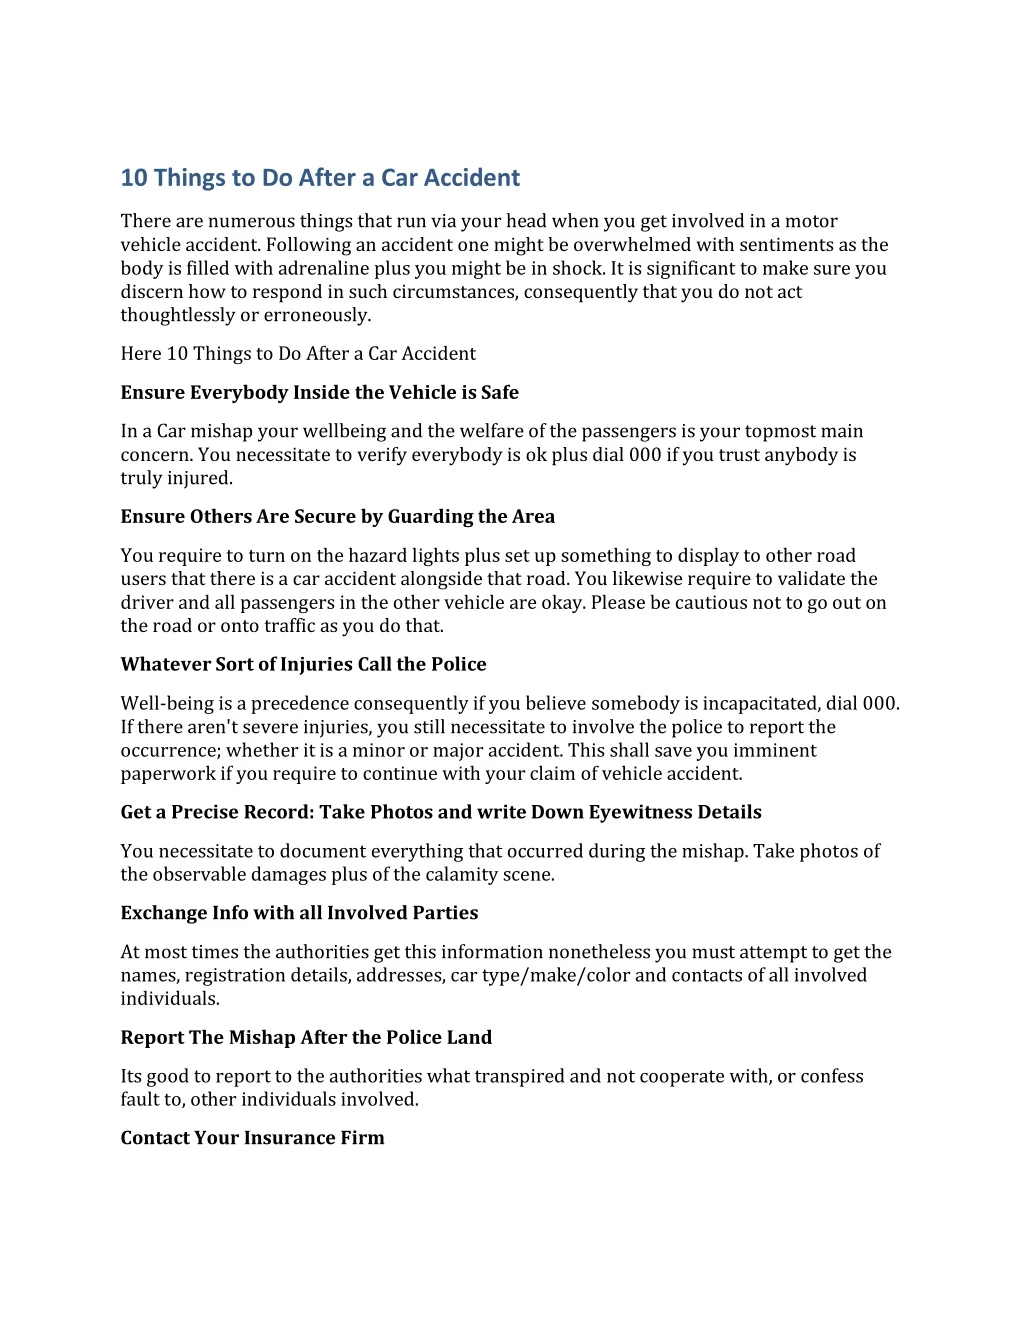 10 things to do after a car accident